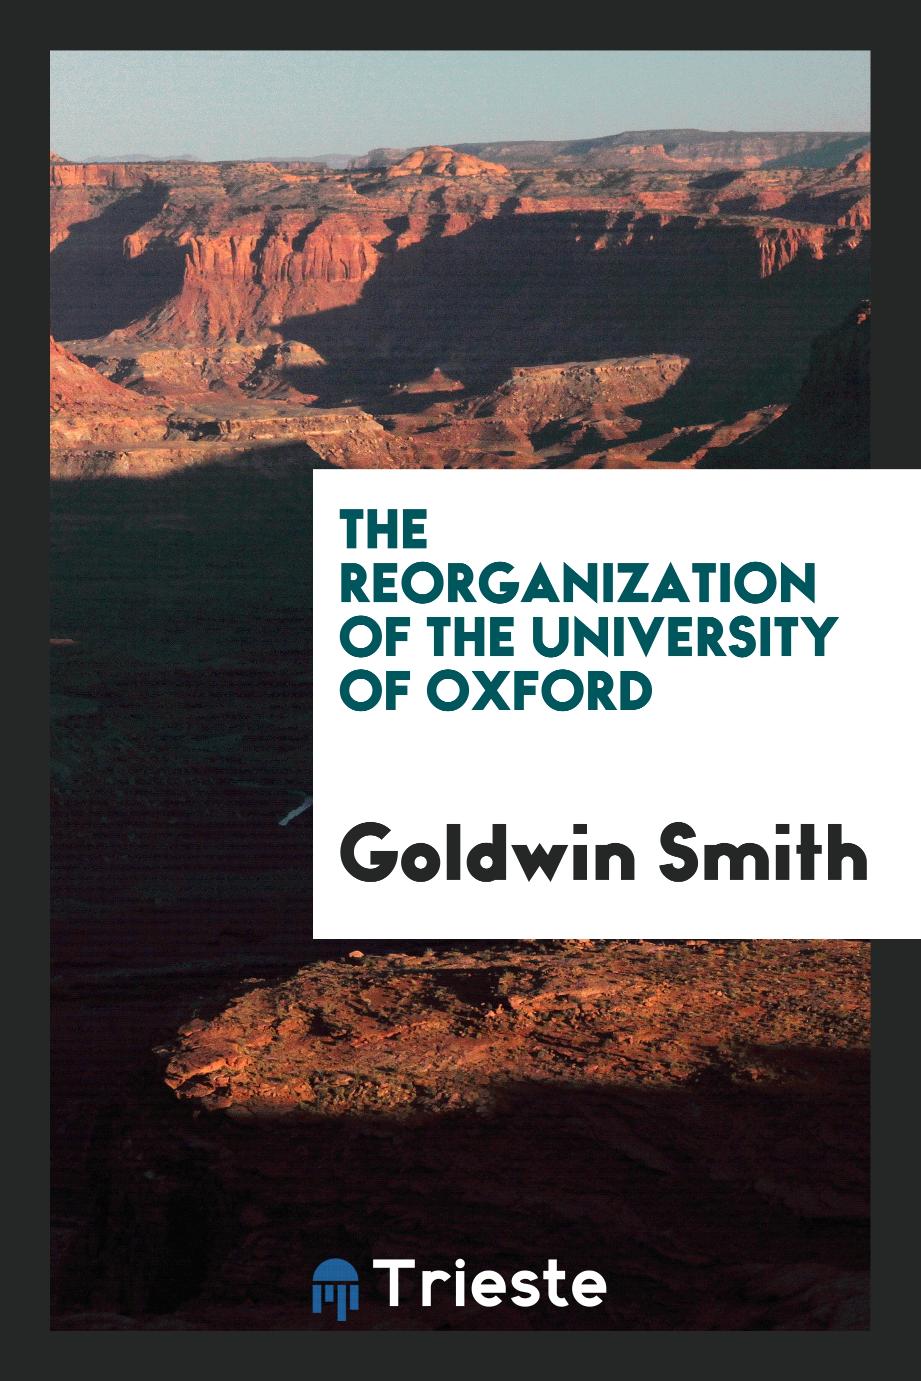 The Reorganization of the University of Oxford